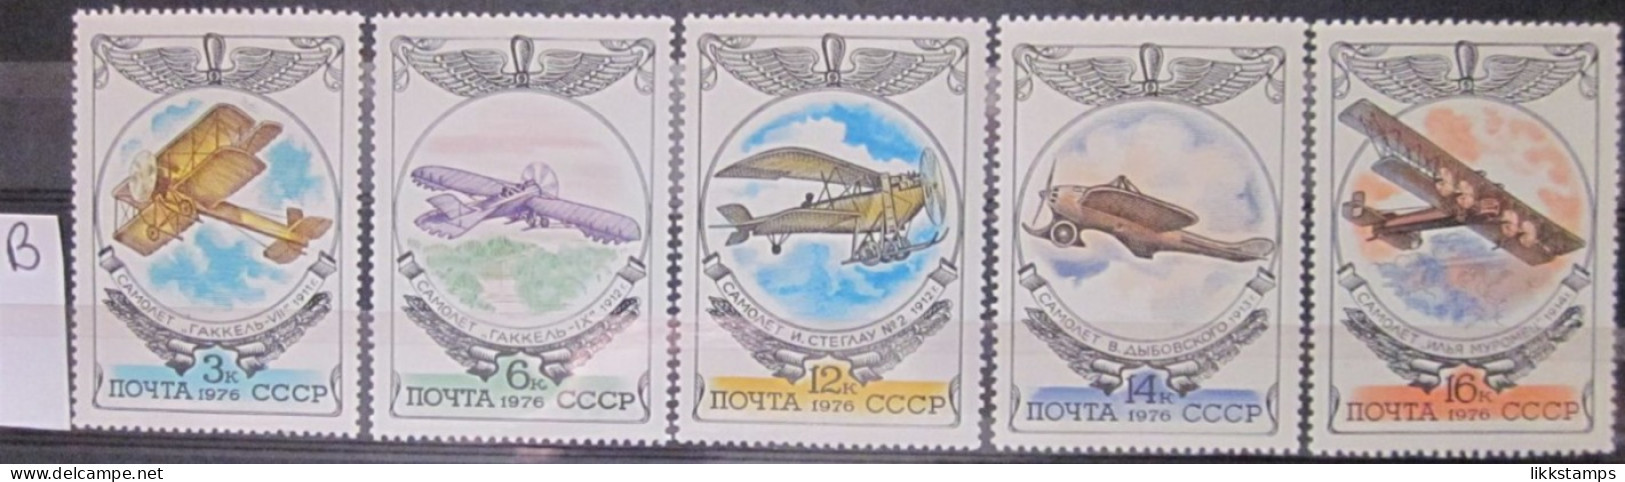 RUSSIA ~ 1976 ~ S.G. NUMBERS 4580 - 4584. ~ 'LOT B' ~ AIRCRAFT. ~ MNH #03584 - Unused Stamps